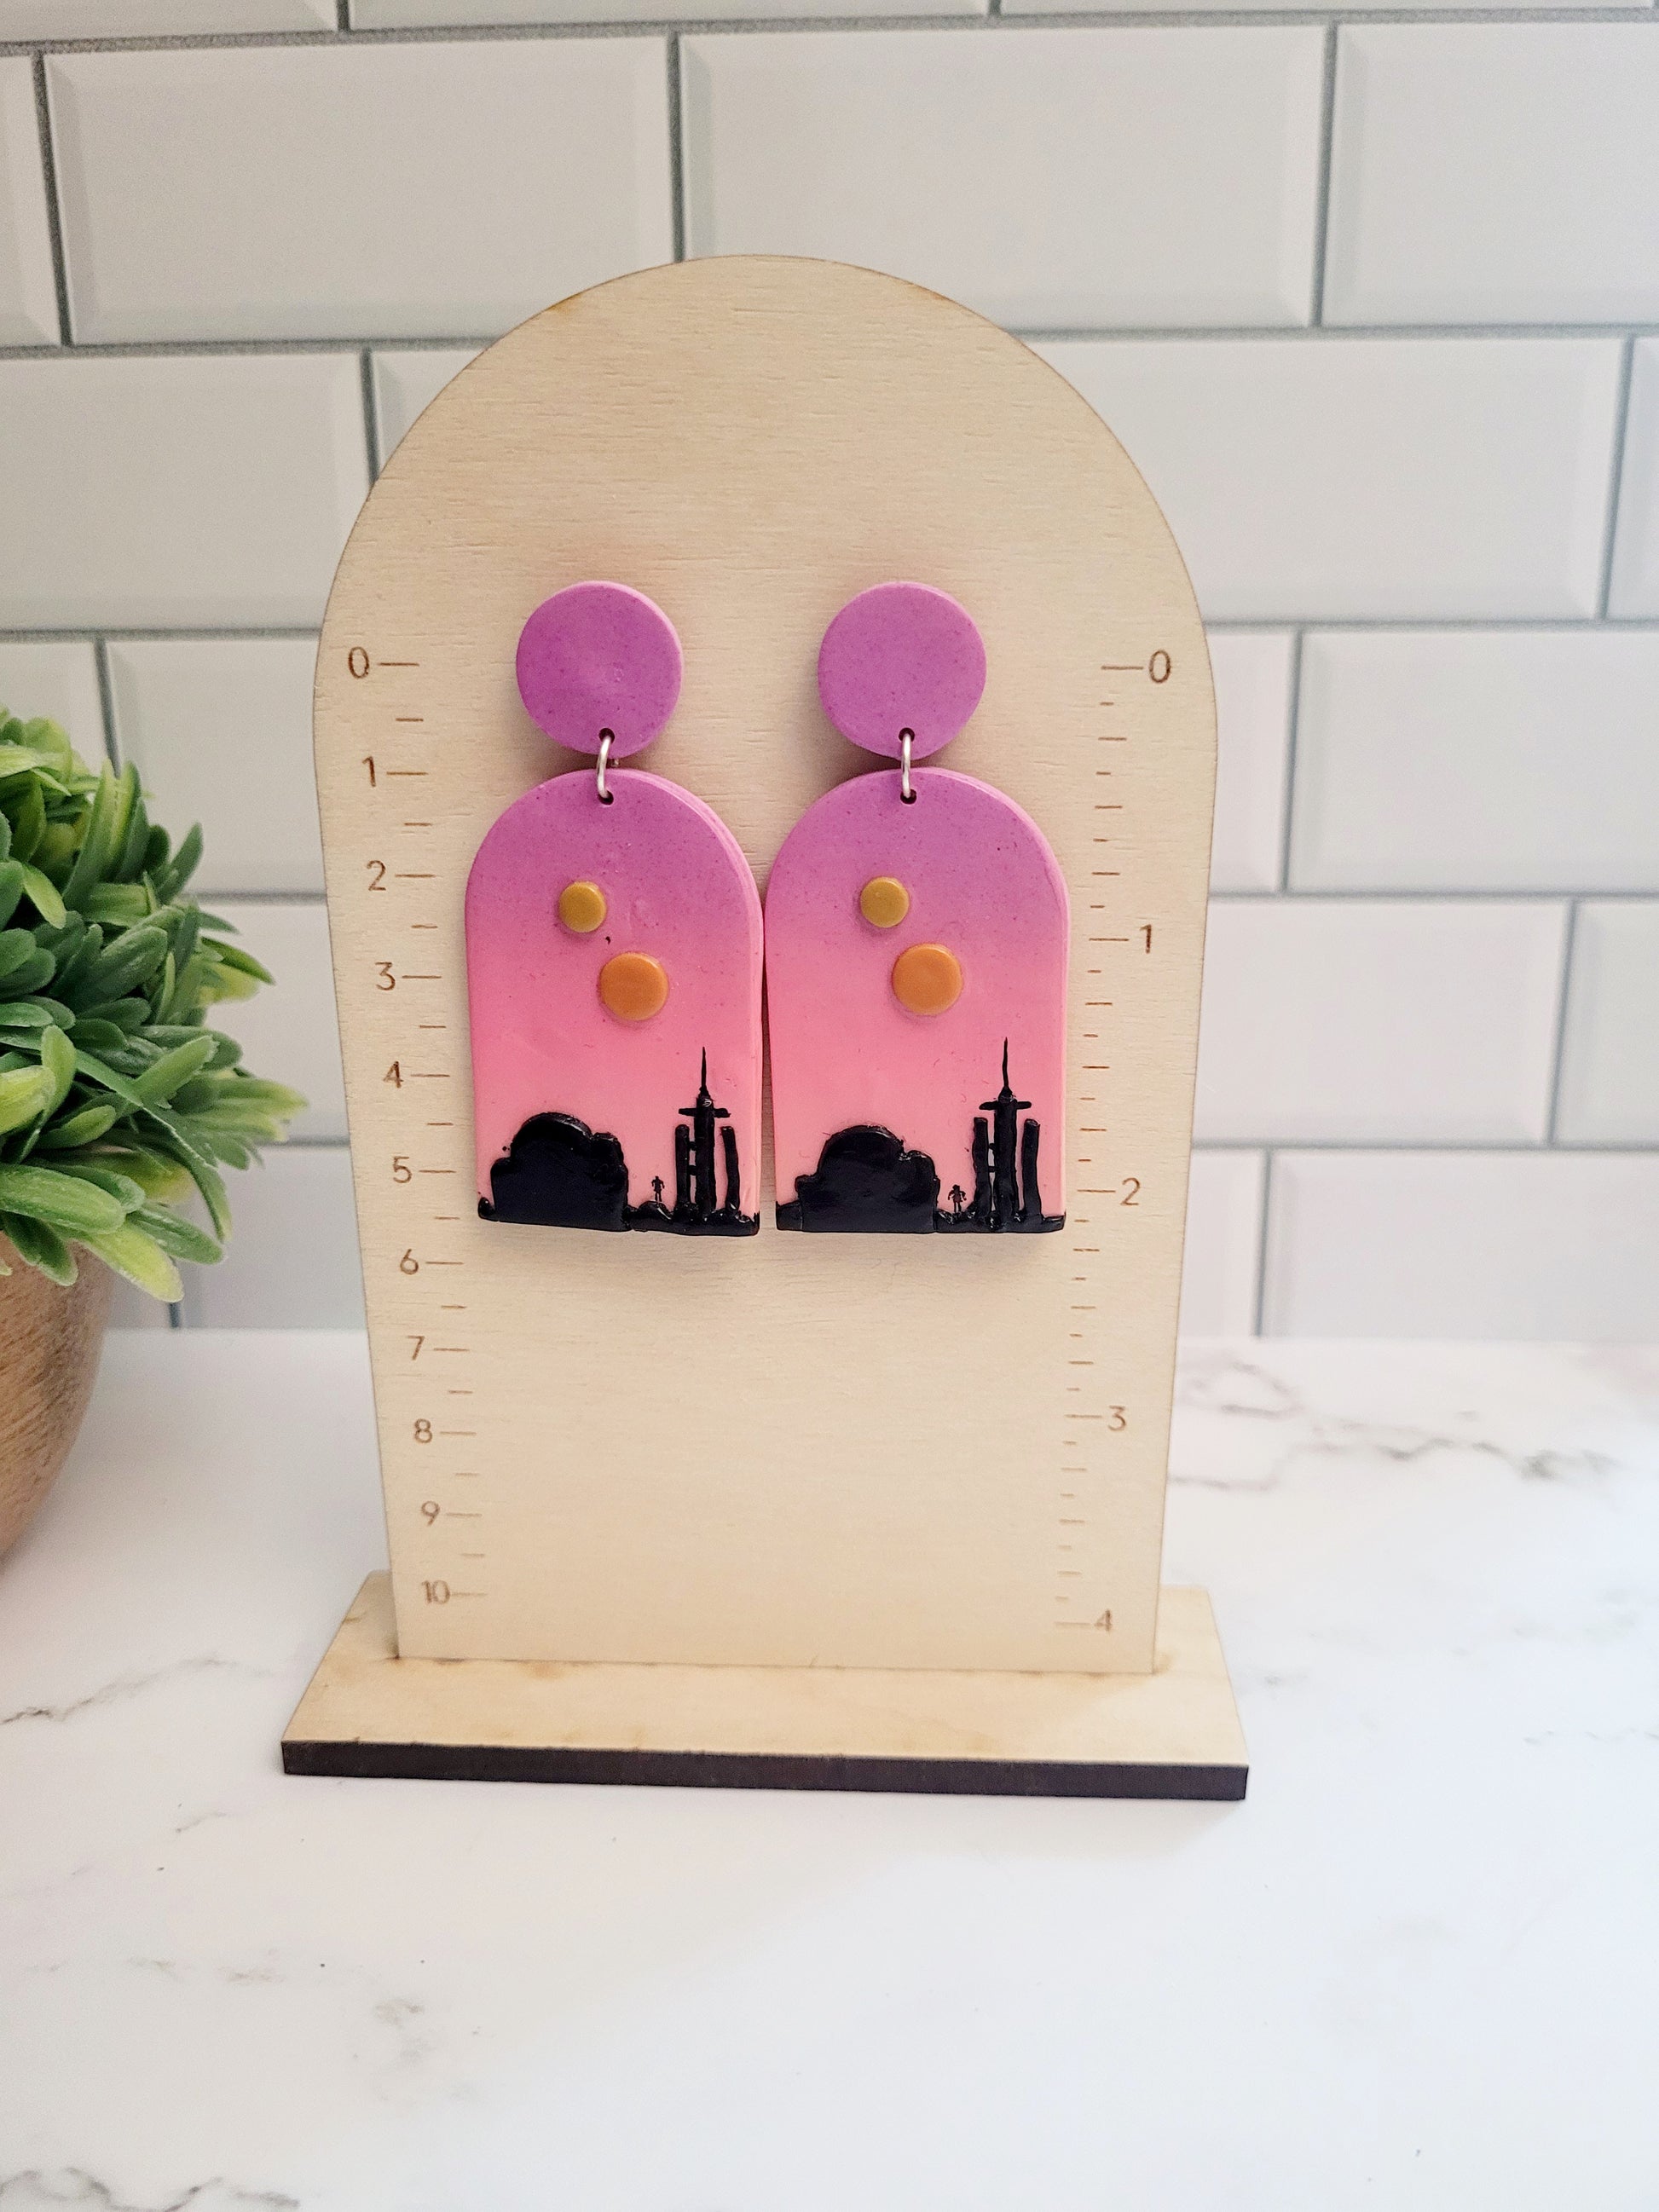 Arch earrings with a sunset landscape on a ruler